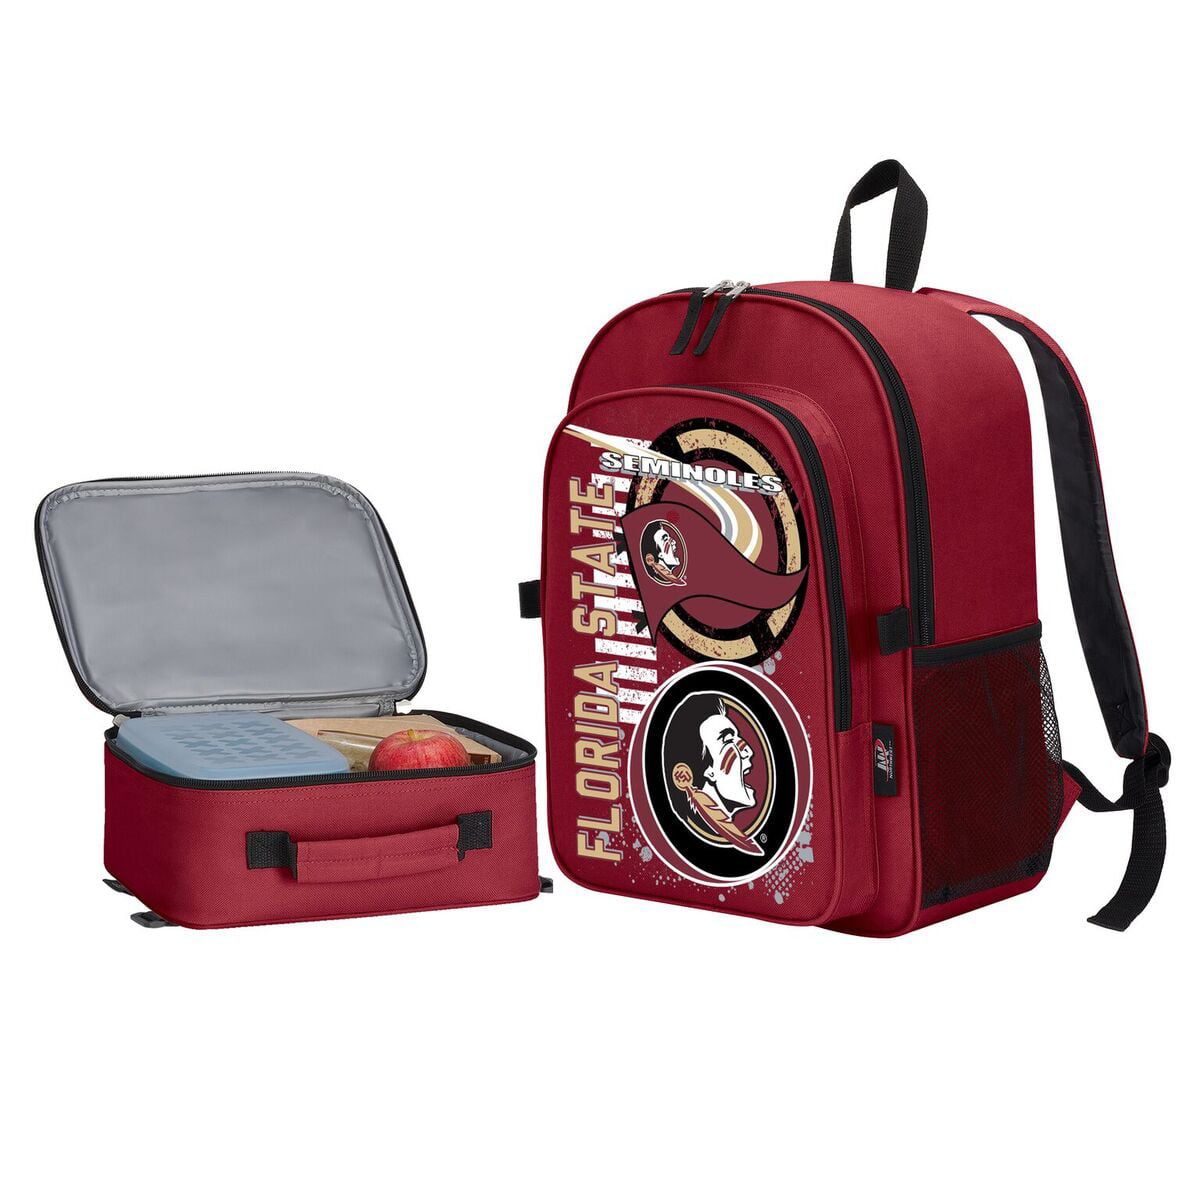 10.5 x 8.5 x 4 Officially Licensed NCAA Accelerator Lunch Kit Bag Multiple Colors 